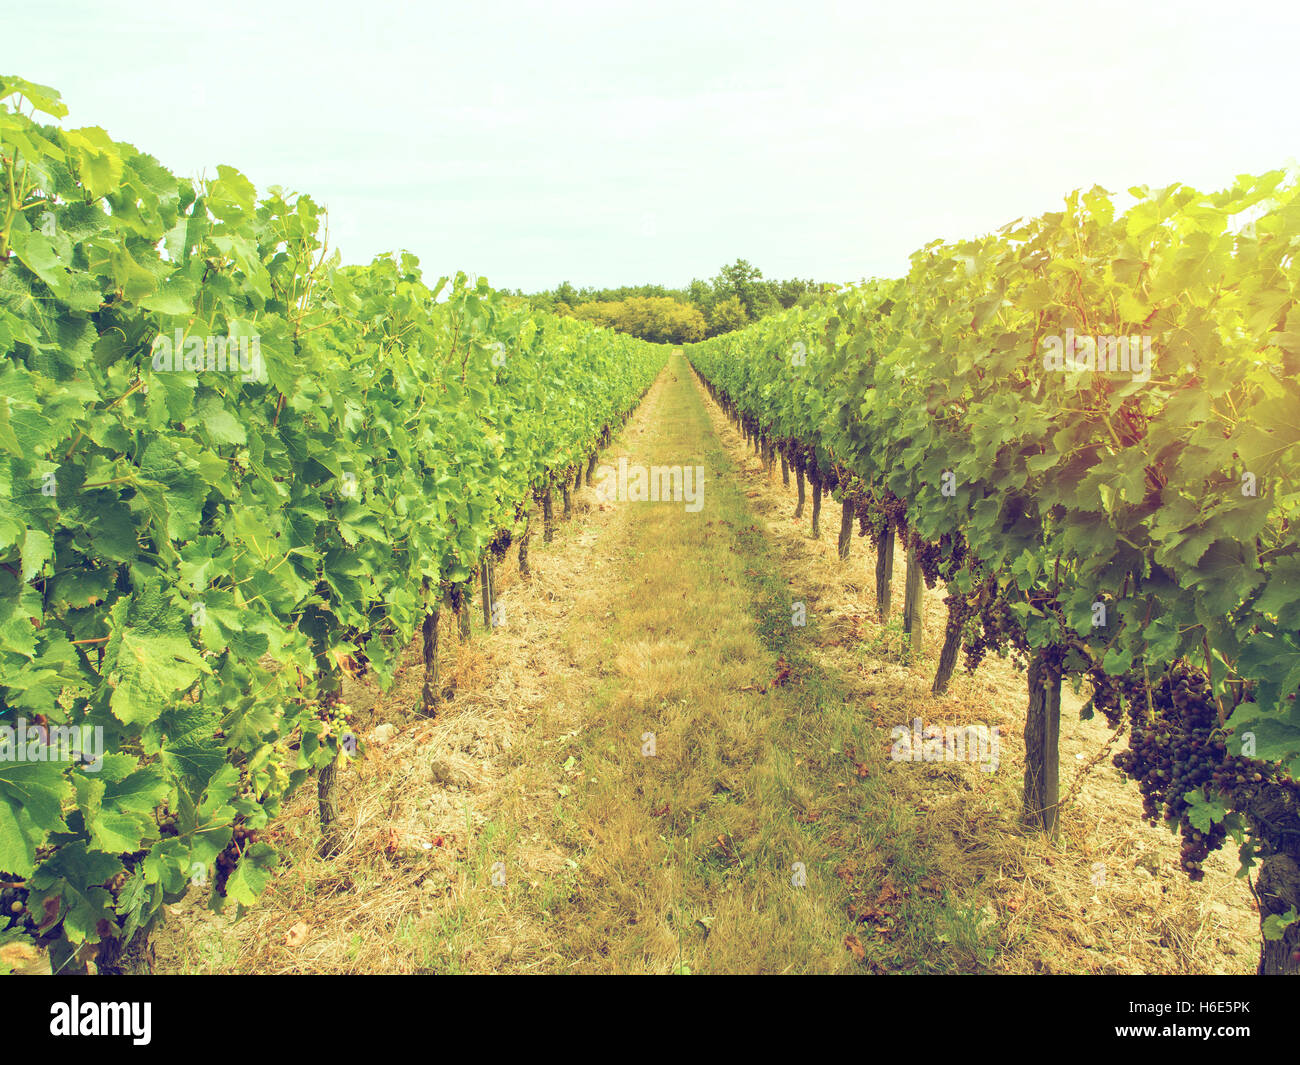 Bunches of cabernet sauvignon grapes growing in a vineyard in Bordeaux region, France. Stock Photo